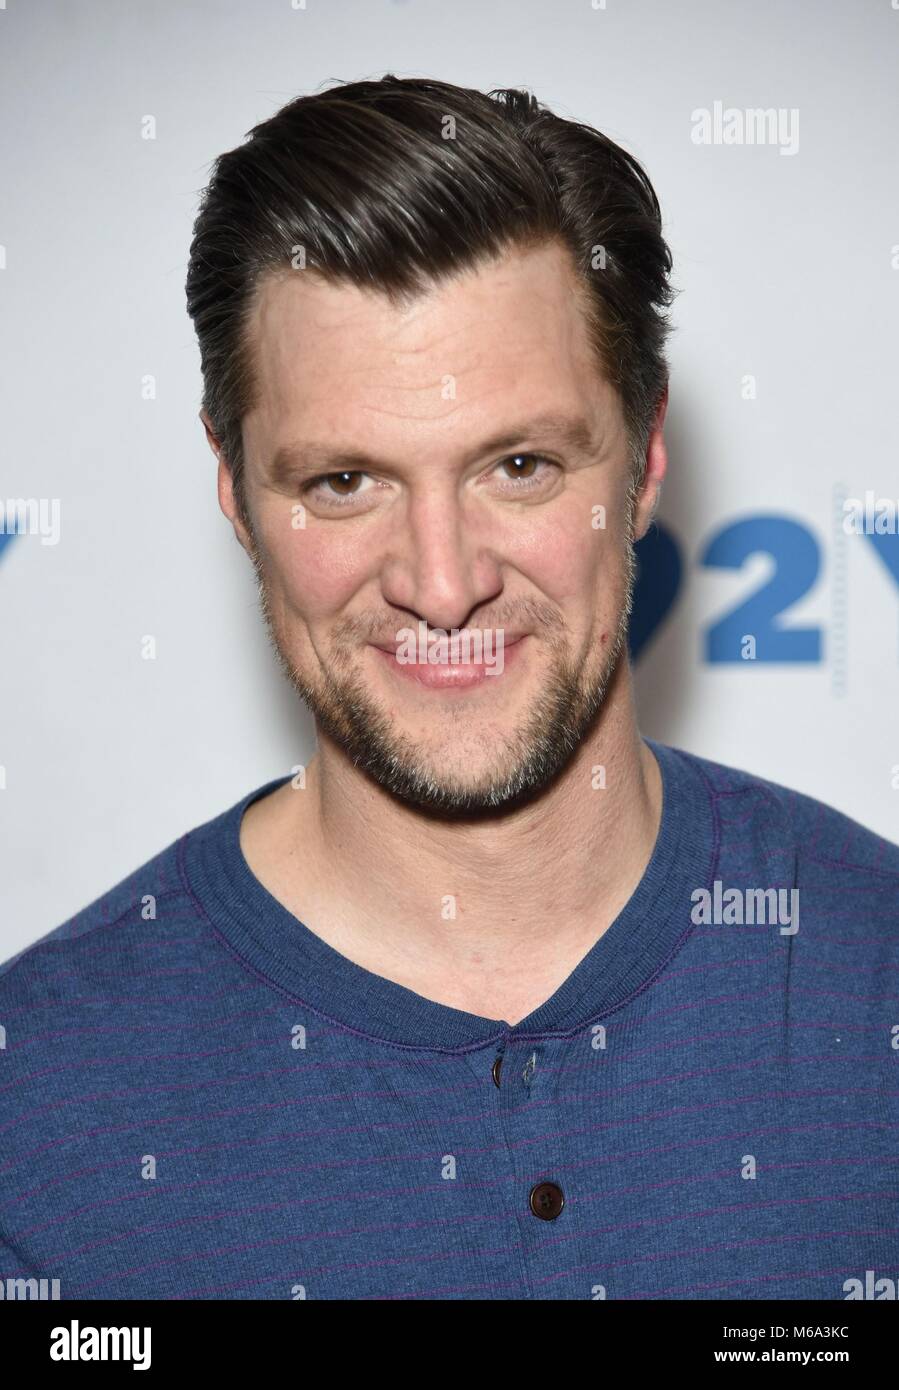 New York, NY, USA. 1st Mar, 2018. Shane McRae at arrivals for SNEAKY PETE and THE MARVELOUS MRS. MAISEL Casts Appearance, 92nd Street Y, New York, NY March 1, 2018. Credit: Derek Storm/Everett Collection/Alamy Live News Stock Photo